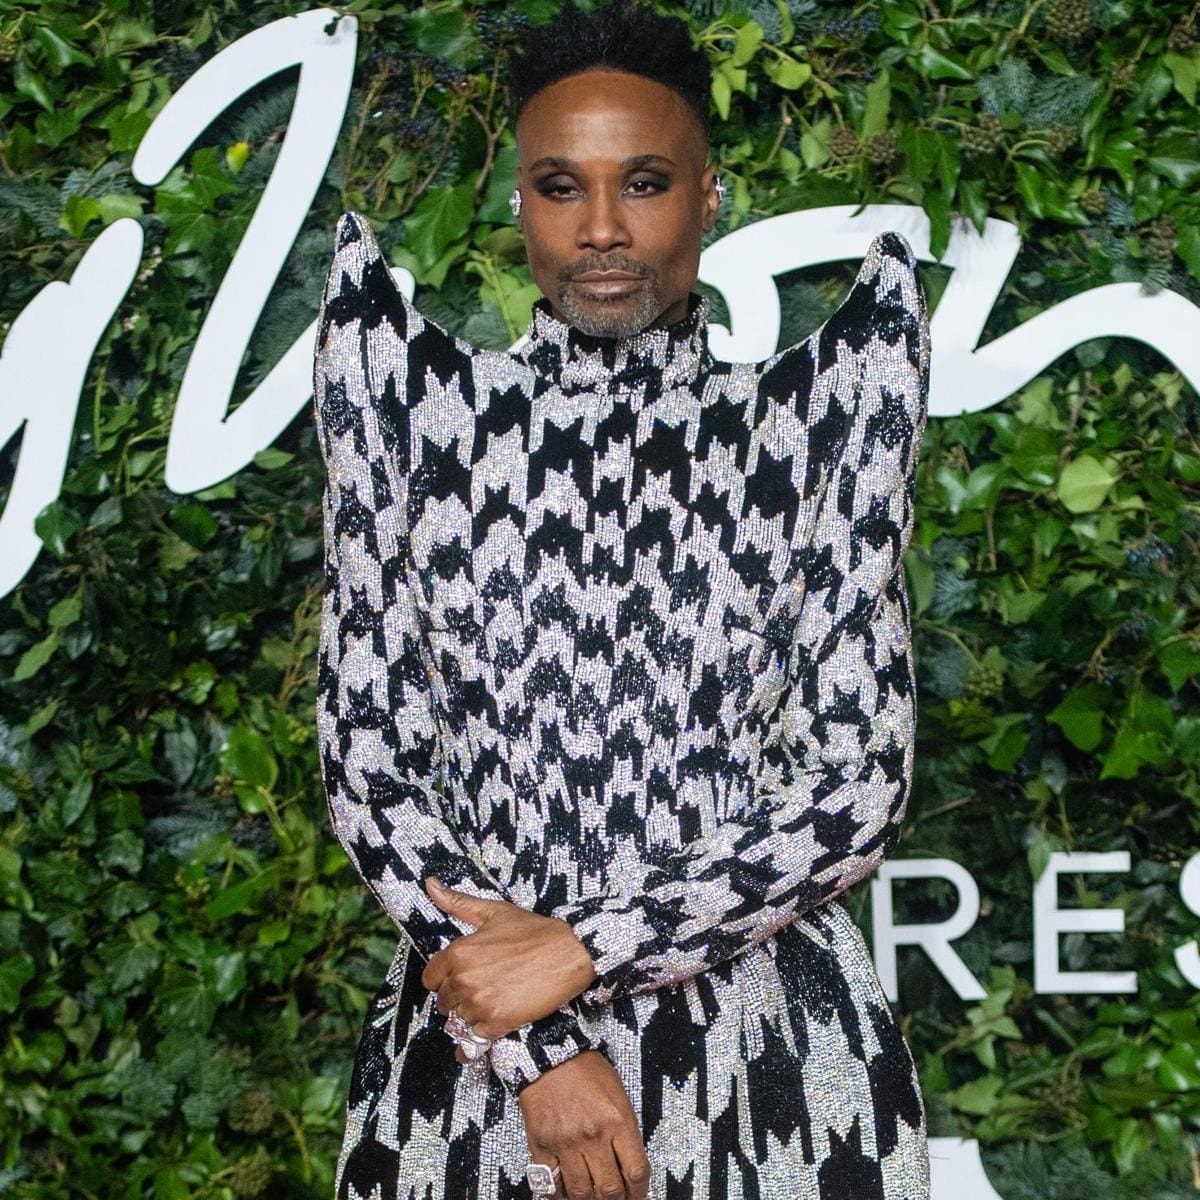 Billy Porter at The Fashion Awards 2021